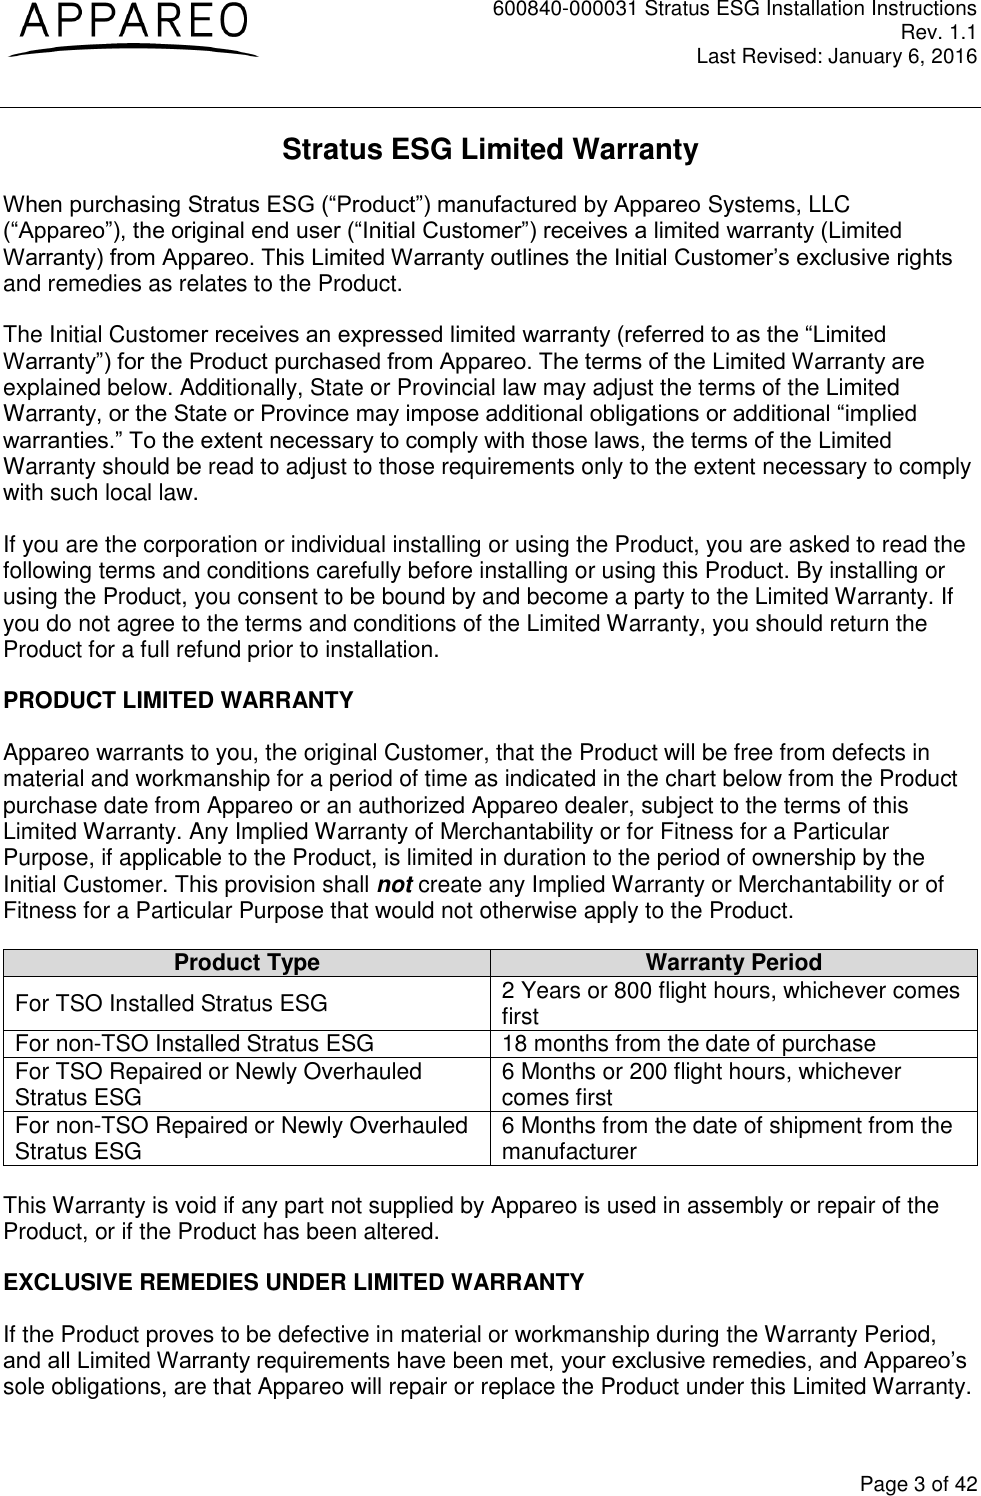 600840-000031 Stratus ESG Installation Instructions Rev. 1.1 Last Revised: January 6, 2016  Page 3 of 42 Stratus ESG Limited Warranty When purchasing Stratus ESG (“Product”) manufactured by Appareo Systems, LLC (“Appareo”), the original end user (“Initial Customer”) receives a limited warranty (Limited Warranty) from Appareo. This Limited Warranty outlines the Initial Customer’s exclusive rights and remedies as relates to the Product. The Initial Customer receives an expressed limited warranty (referred to as the “Limited Warranty”) for the Product purchased from Appareo. The terms of the Limited Warranty are explained below. Additionally, State or Provincial law may adjust the terms of the Limited Warranty, or the State or Province may impose additional obligations or additional “implied warranties.” To the extent necessary to comply with those laws, the terms of the Limited Warranty should be read to adjust to those requirements only to the extent necessary to comply with such local law. If you are the corporation or individual installing or using the Product, you are asked to read the following terms and conditions carefully before installing or using this Product. By installing or using the Product, you consent to be bound by and become a party to the Limited Warranty. If you do not agree to the terms and conditions of the Limited Warranty, you should return the Product for a full refund prior to installation.  PRODUCT LIMITED WARRANTY Appareo warrants to you, the original Customer, that the Product will be free from defects in material and workmanship for a period of time as indicated in the chart below from the Product purchase date from Appareo or an authorized Appareo dealer, subject to the terms of this Limited Warranty. Any Implied Warranty of Merchantability or for Fitness for a Particular Purpose, if applicable to the Product, is limited in duration to the period of ownership by the Initial Customer. This provision shall not create any Implied Warranty or Merchantability or of Fitness for a Particular Purpose that would not otherwise apply to the Product.  Product Type Warranty Period For TSO Installed Stratus ESG 2 Years or 800 flight hours, whichever comes first For non-TSO Installed Stratus ESG 18 months from the date of purchase For TSO Repaired or Newly Overhauled Stratus ESG  6 Months or 200 flight hours, whichever comes first For non-TSO Repaired or Newly Overhauled Stratus ESG  6 Months from the date of shipment from the manufacturer  This Warranty is void if any part not supplied by Appareo is used in assembly or repair of the Product, or if the Product has been altered.  EXCLUSIVE REMEDIES UNDER LIMITED WARRANTY If the Product proves to be defective in material or workmanship during the Warranty Period, and all Limited Warranty requirements have been met, your exclusive remedies, and Appareo’s sole obligations, are that Appareo will repair or replace the Product under this Limited Warranty. 